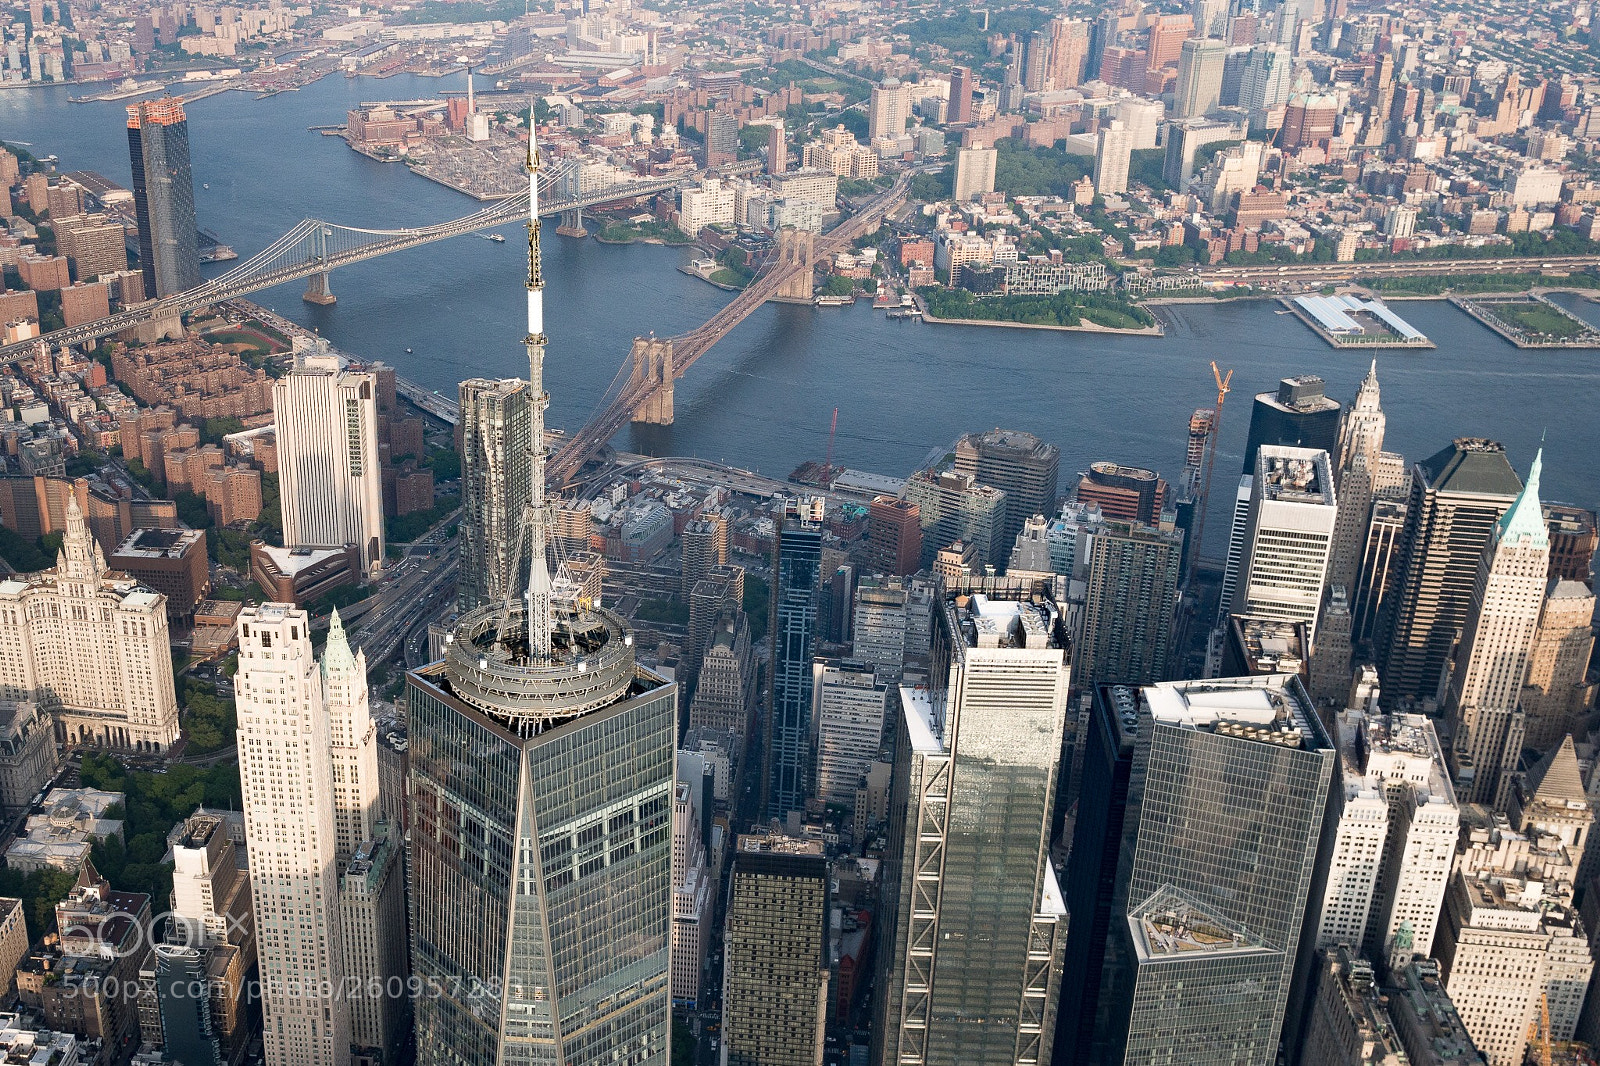 Sony a6300 sample photo. Wtc area
from heli photography